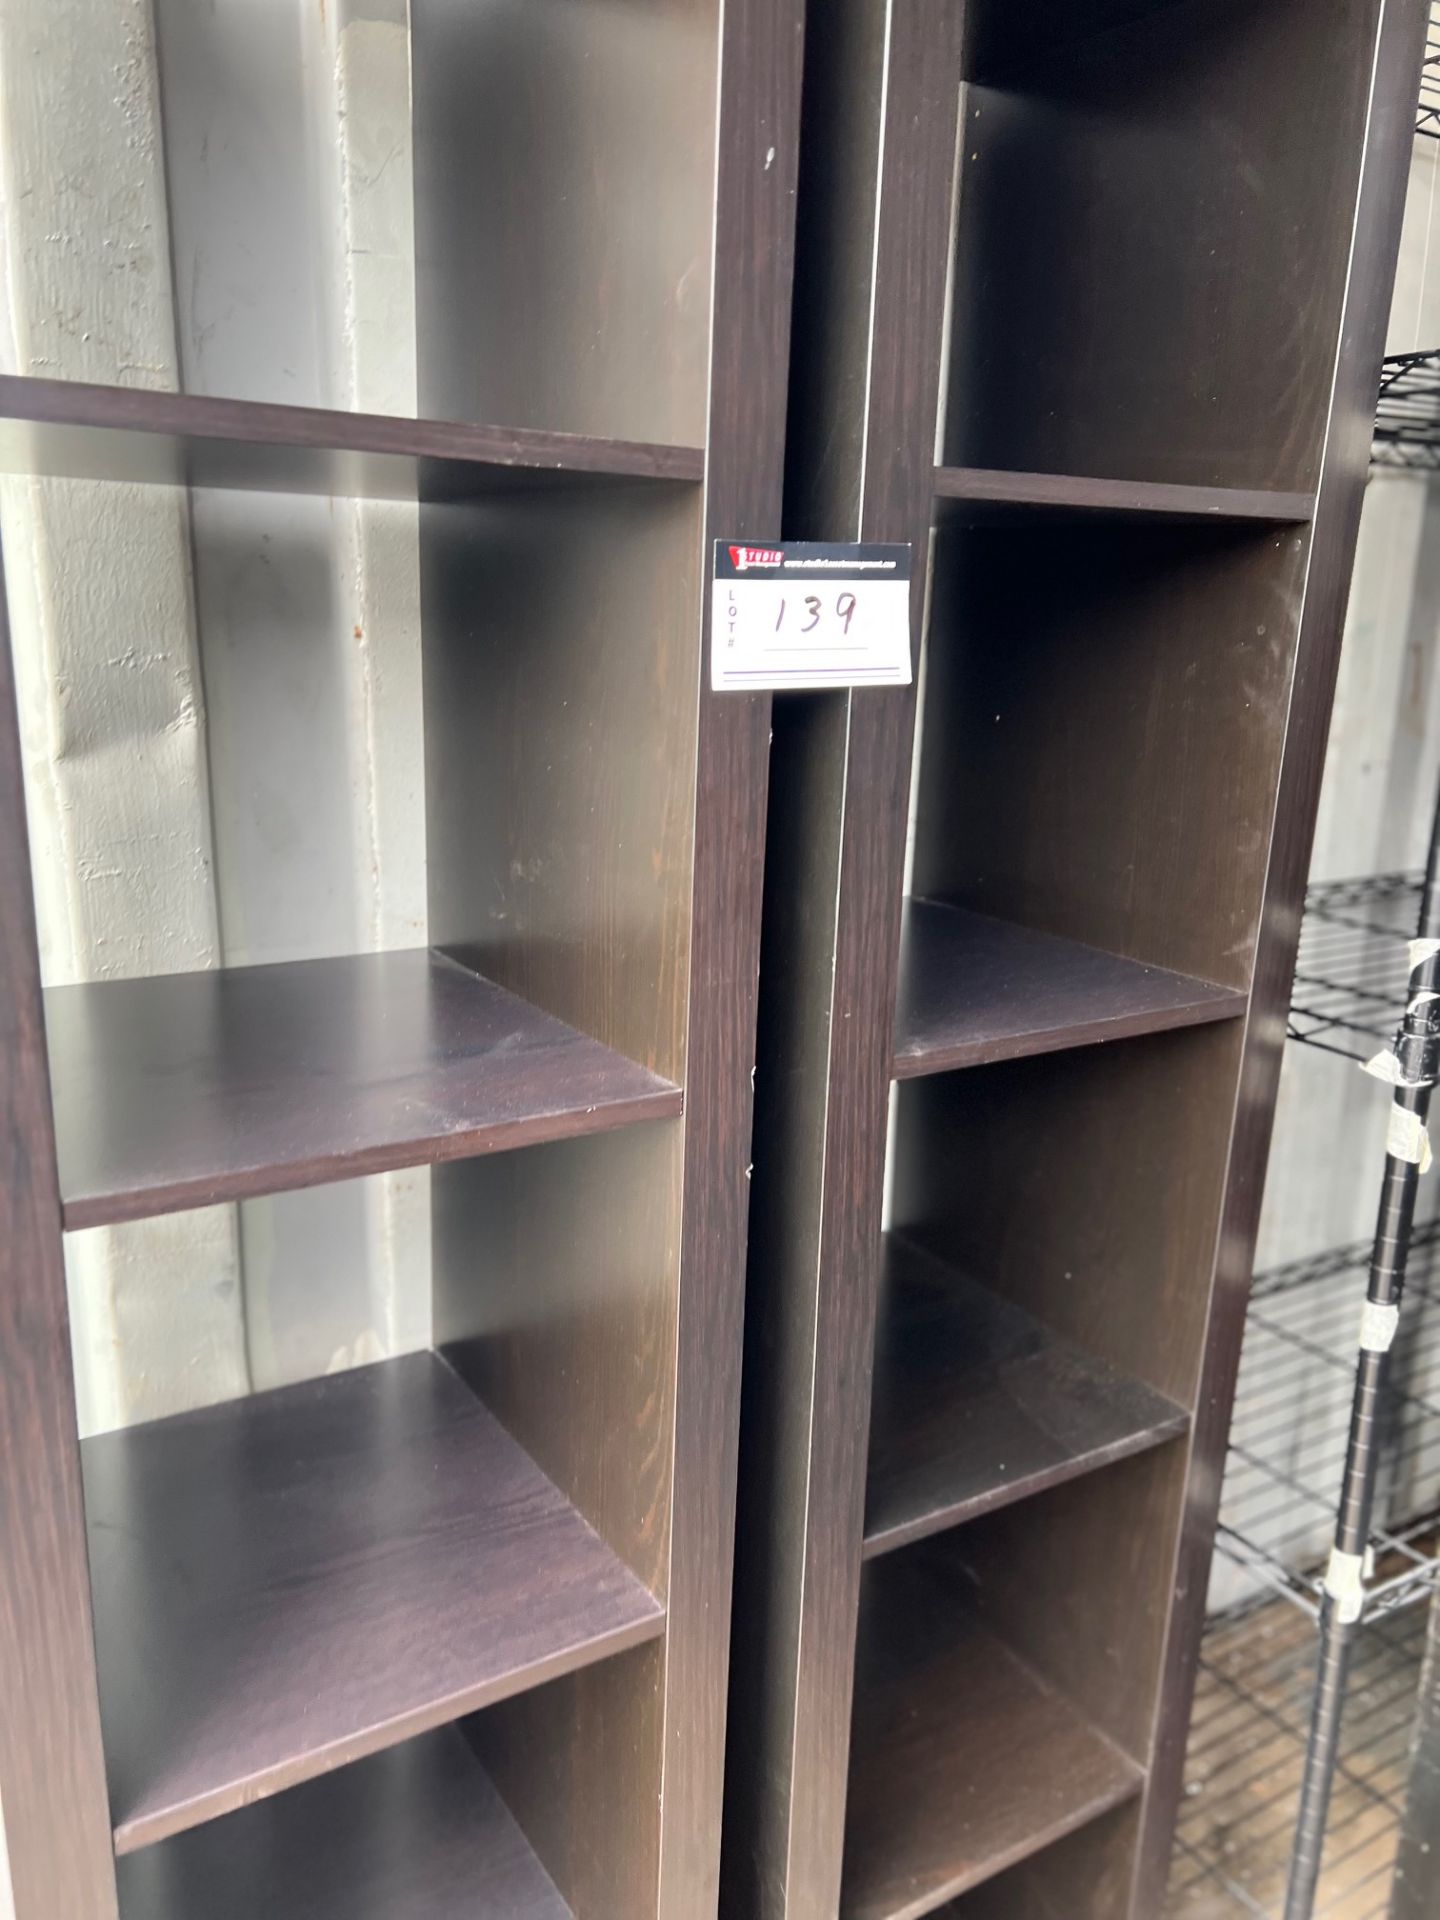 PAIR OF CHOCOLATE BROWN BOOKCASES, 73" X 15" X 15" - Image 2 of 2